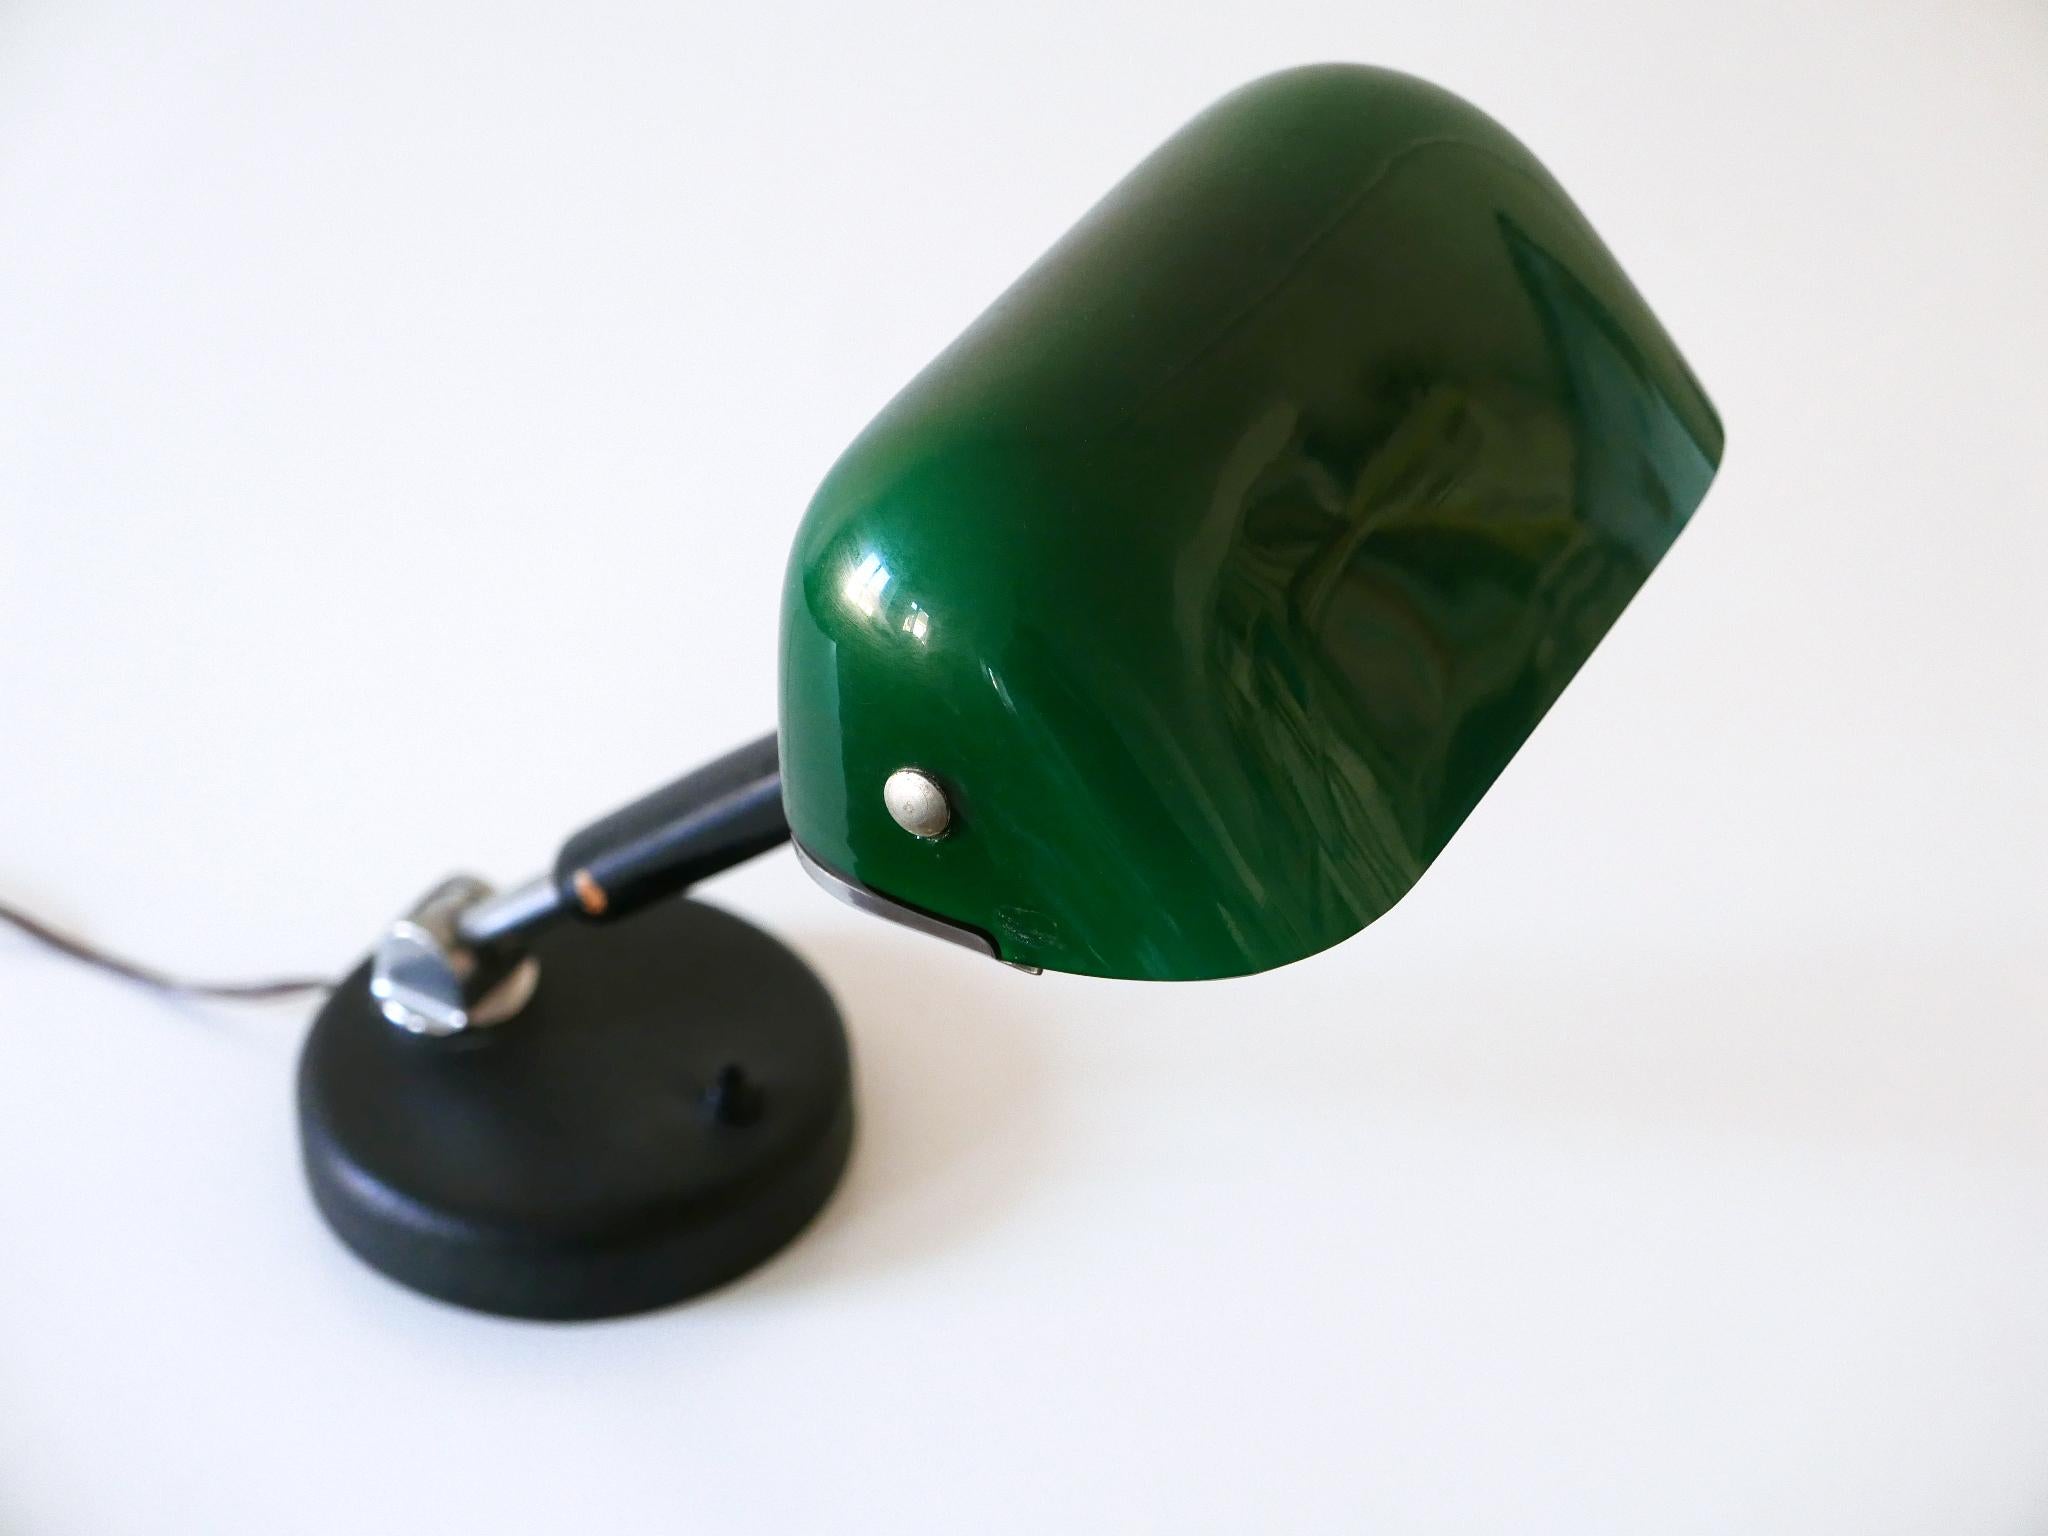 Exceptional Bauhaus Bankers Table Lamp with Original Green Glass, 1930s, Germany 10